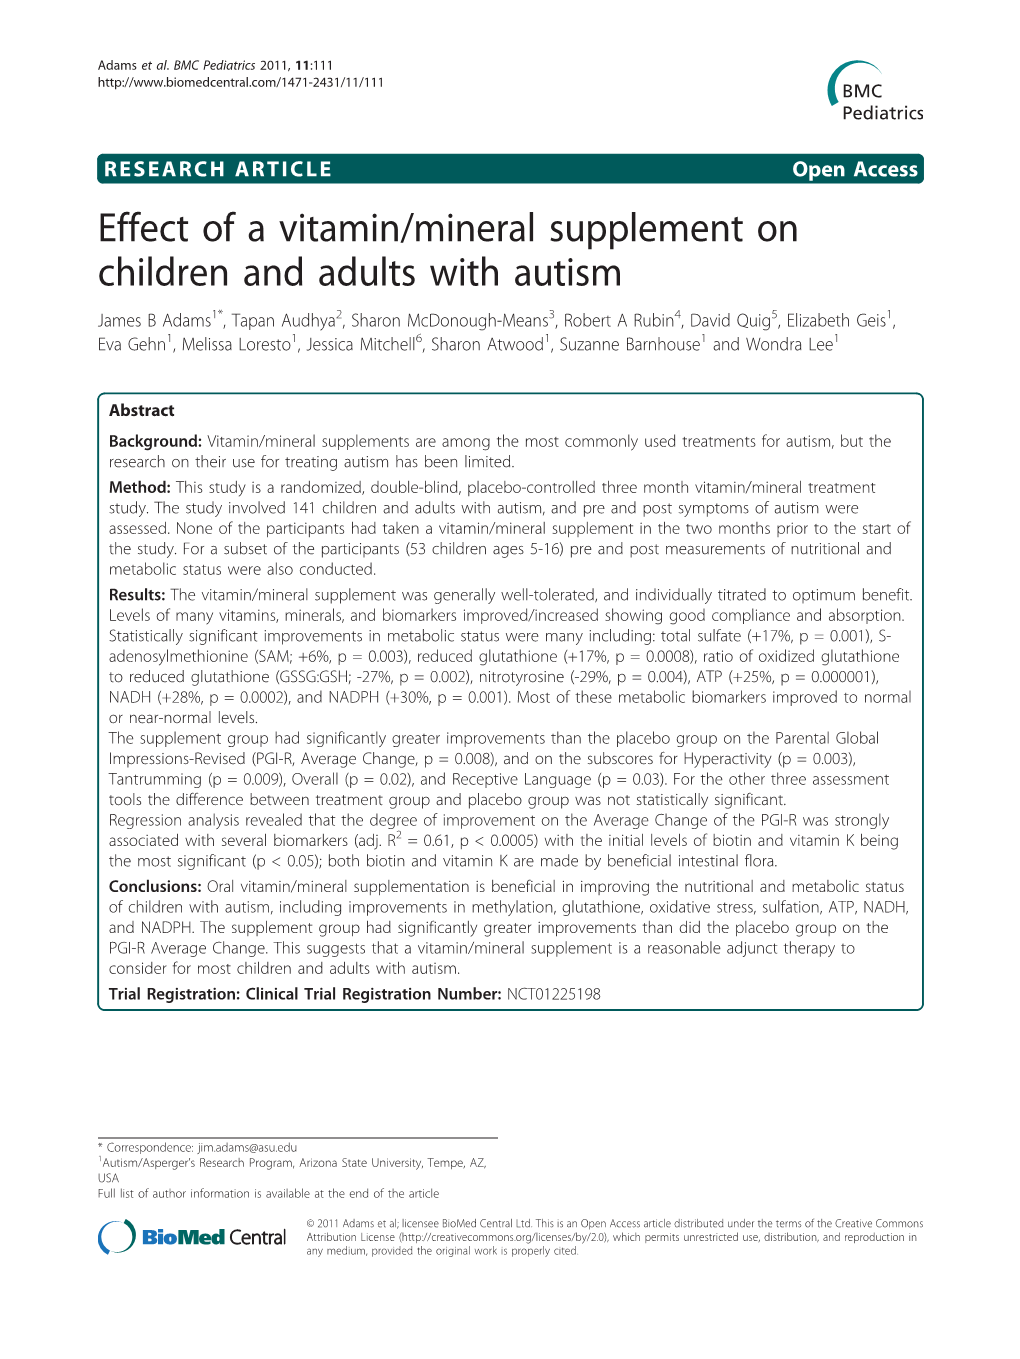 Effect of a Vitamin/Mineral Supplement on Children and Adults with Autism